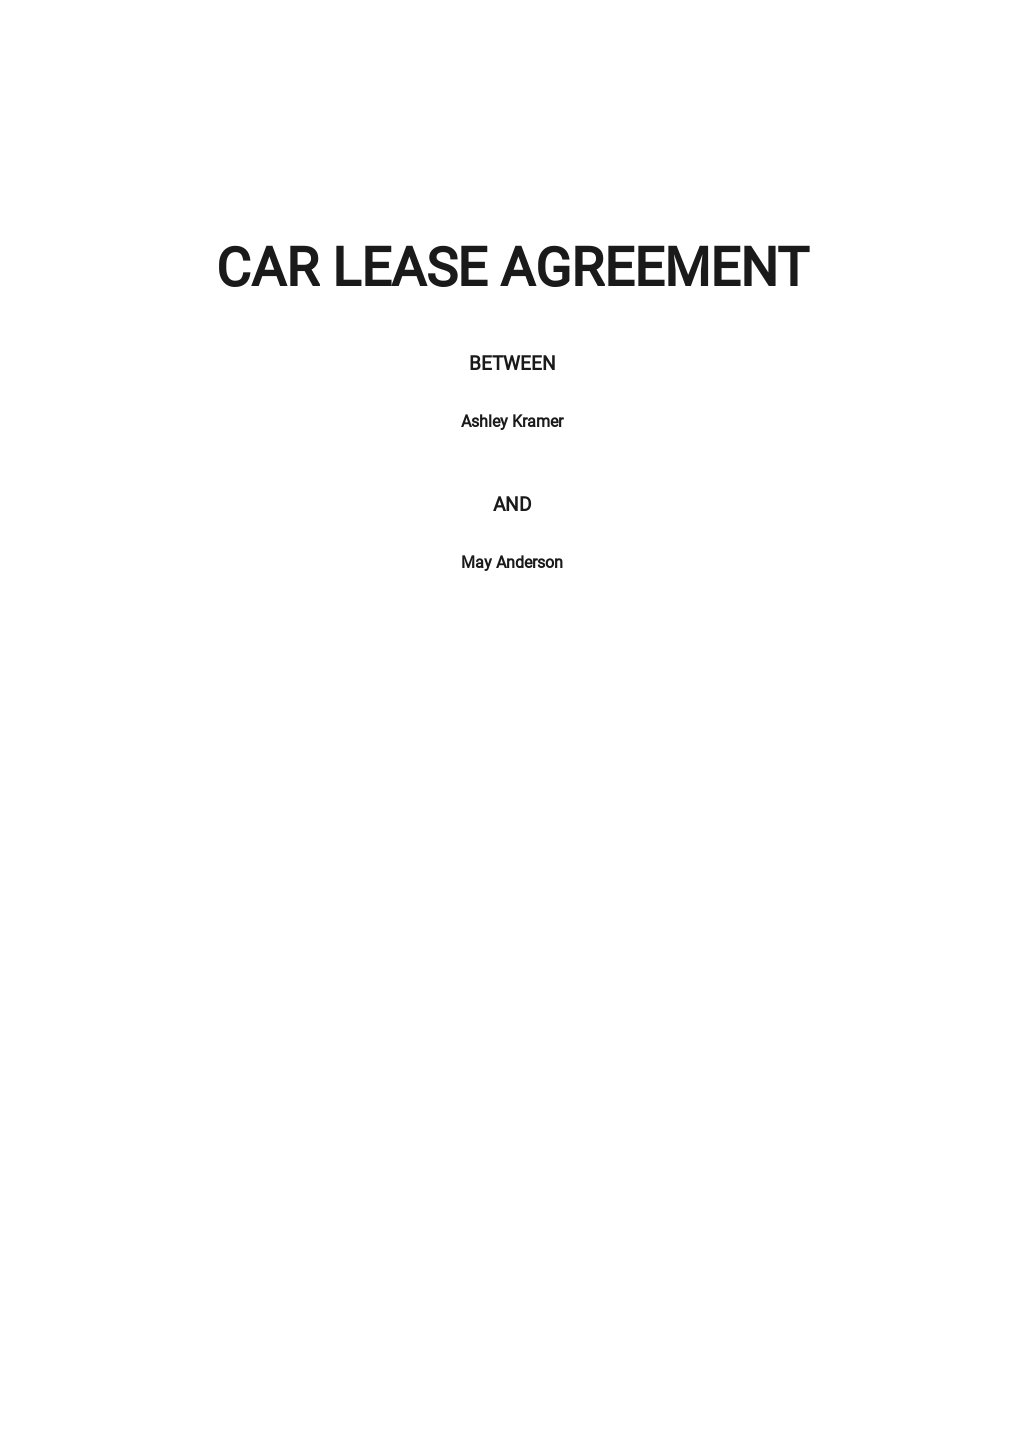 FREE Lease Agreement Templates in PDF Template net